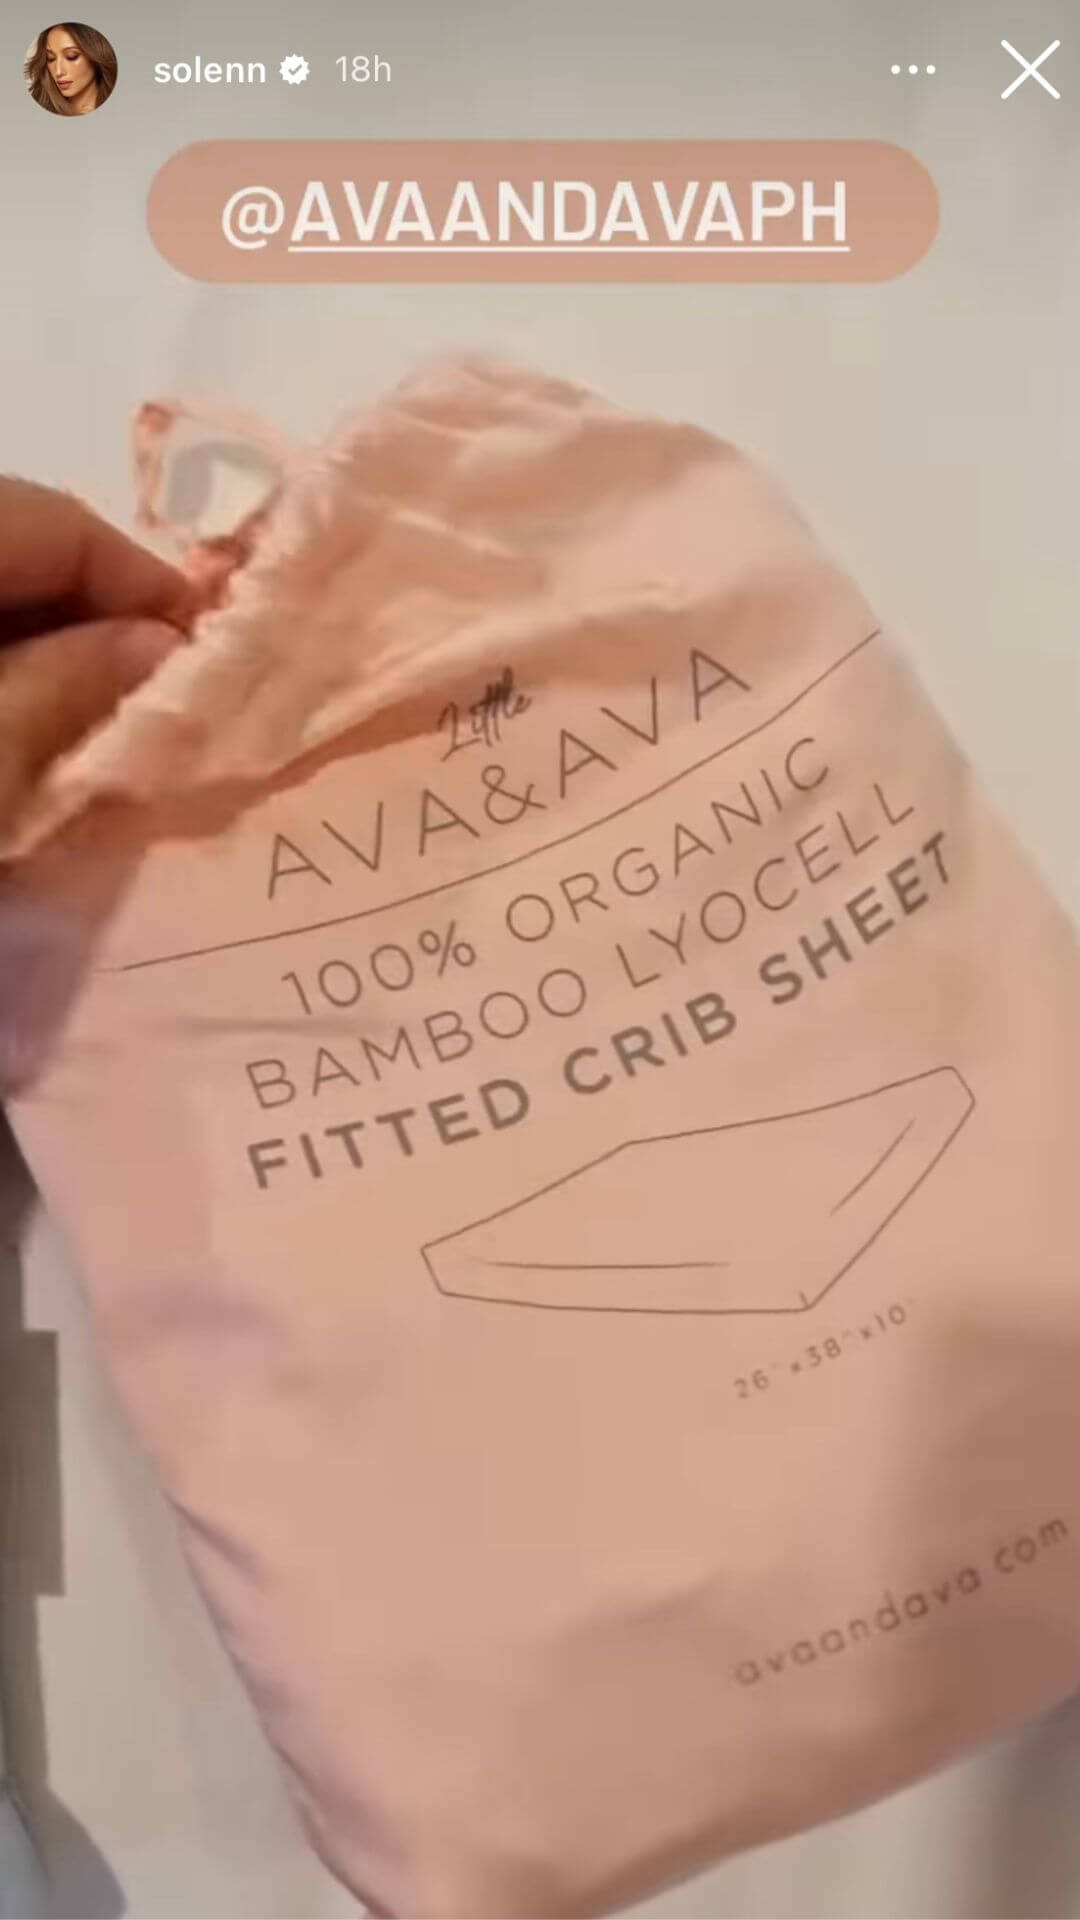 ava and ava ph review buttery breathable soft organic bamboo lyocell baby bedding set (fitted crib sheet, pillowcases, pillows) in pink by solenn heussaff